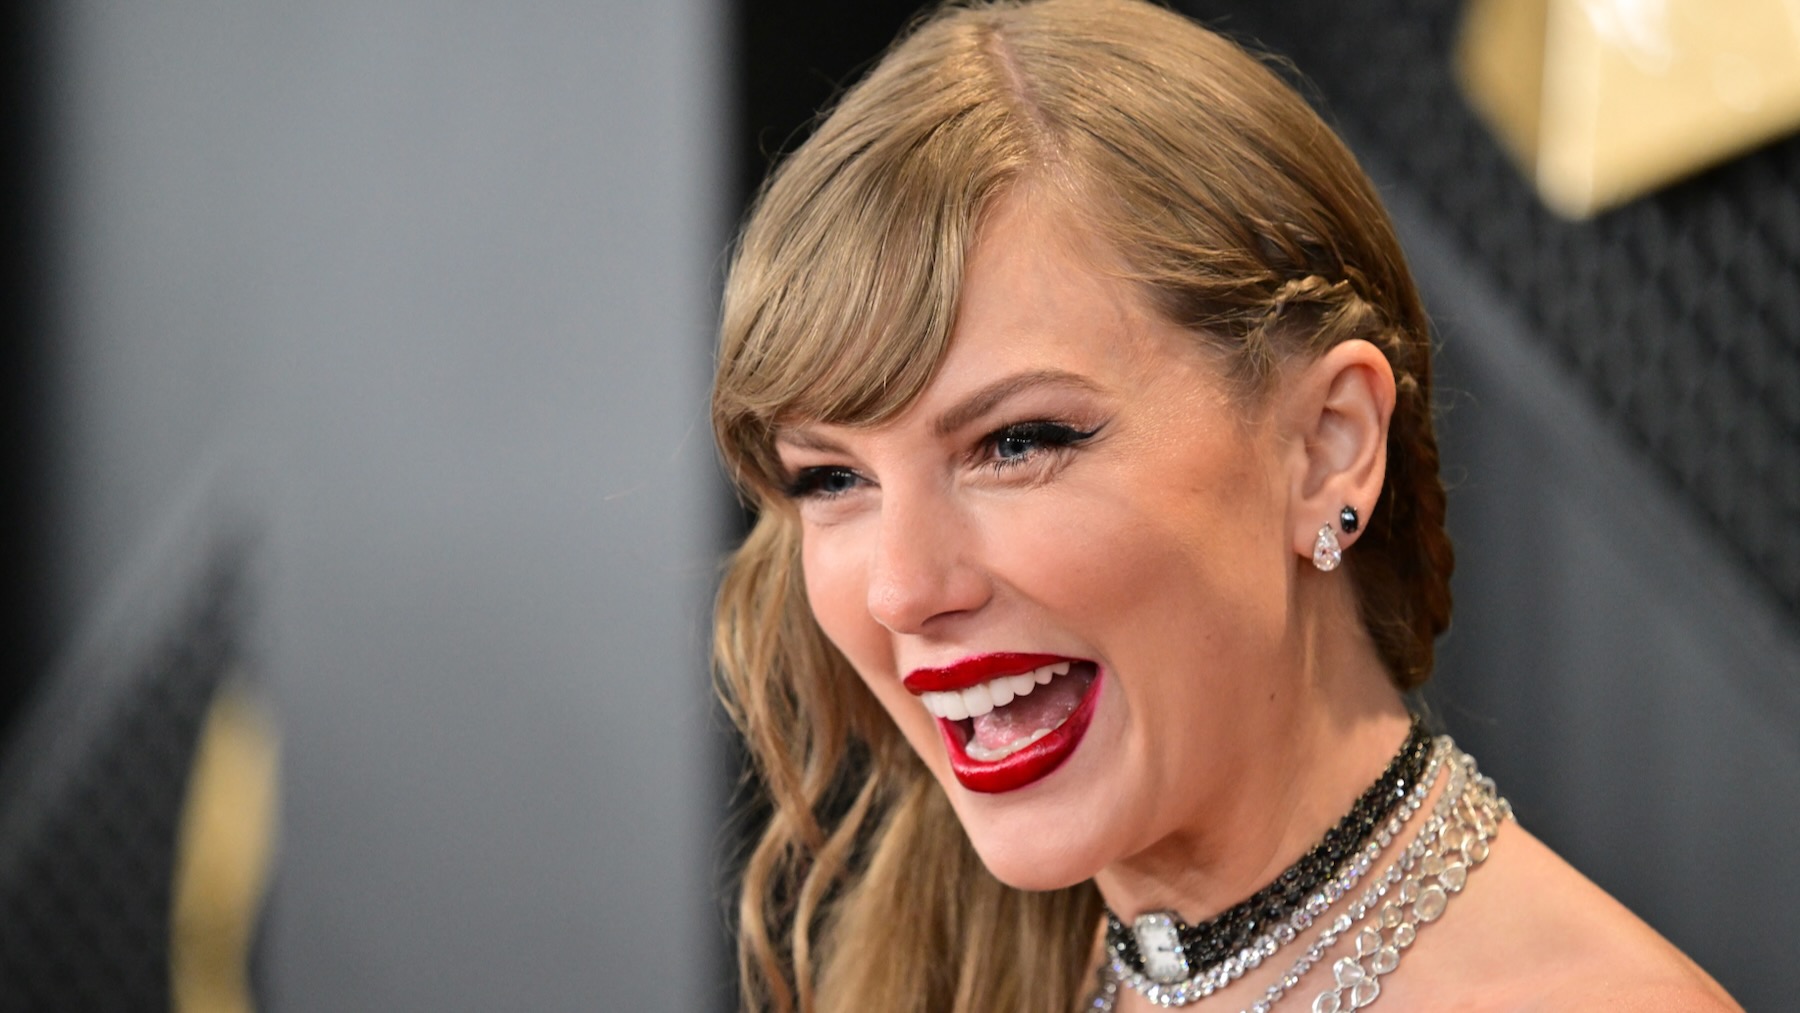 Taylor Swift Sends Cease and Desist Letter to Private Jet Tracker